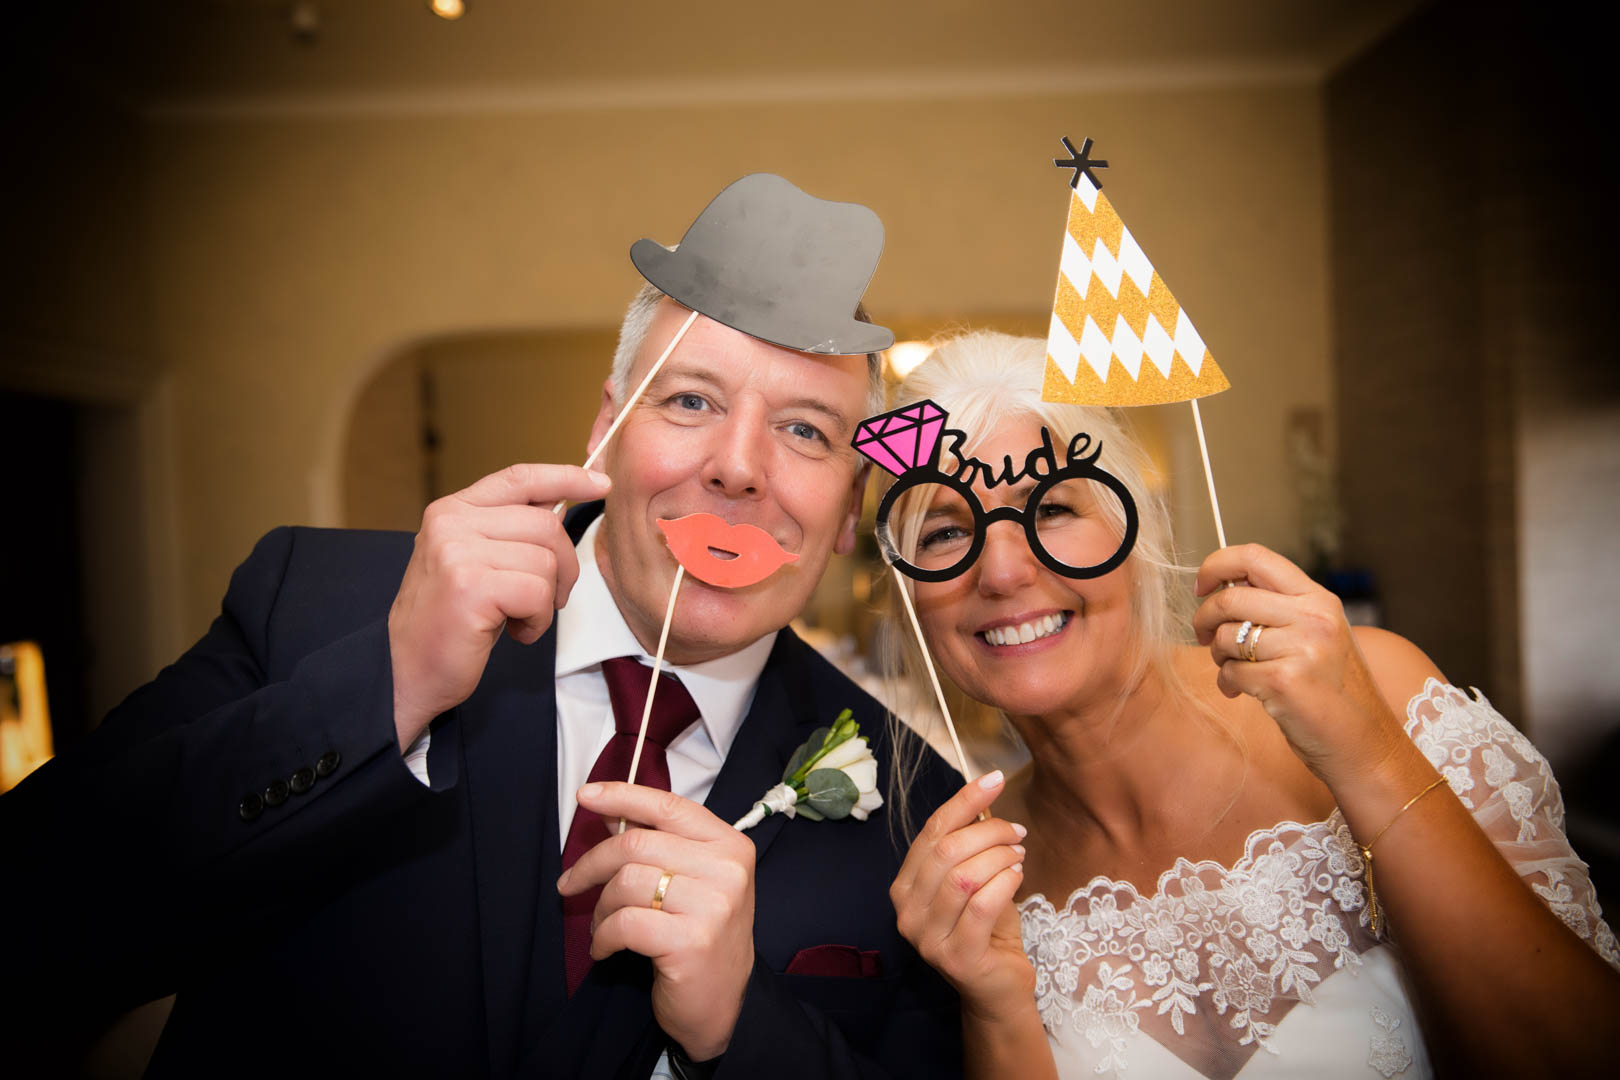 Paul and Louise's wedding photography in Lytham St Annes (69 of 70)